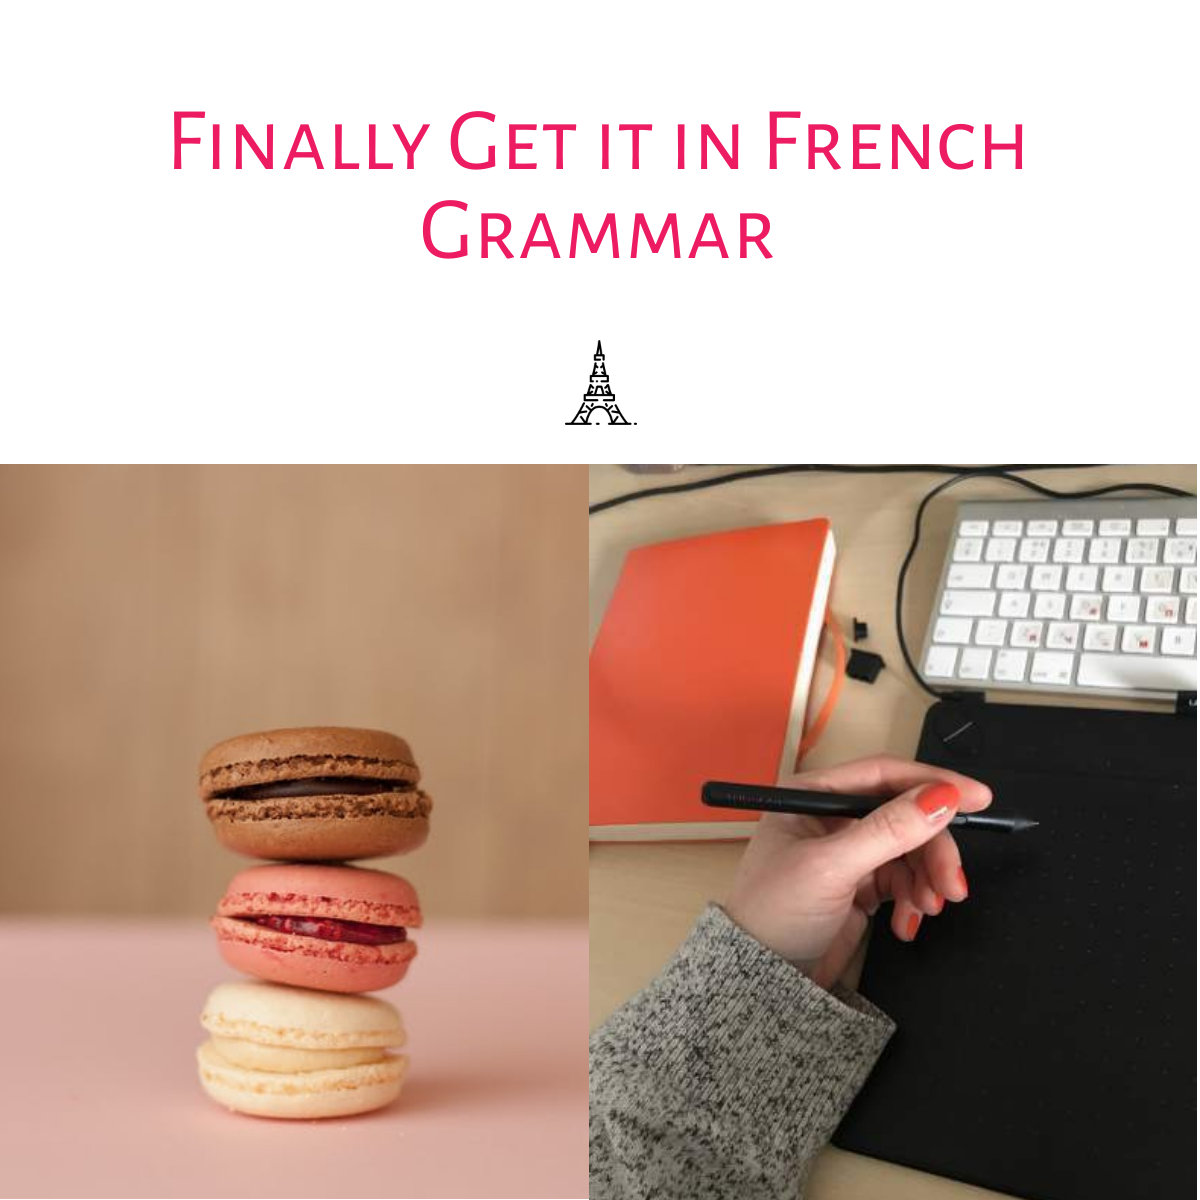 30 Useful French Essay Phrases  Basic french words, Learn french, Useful  french phrases